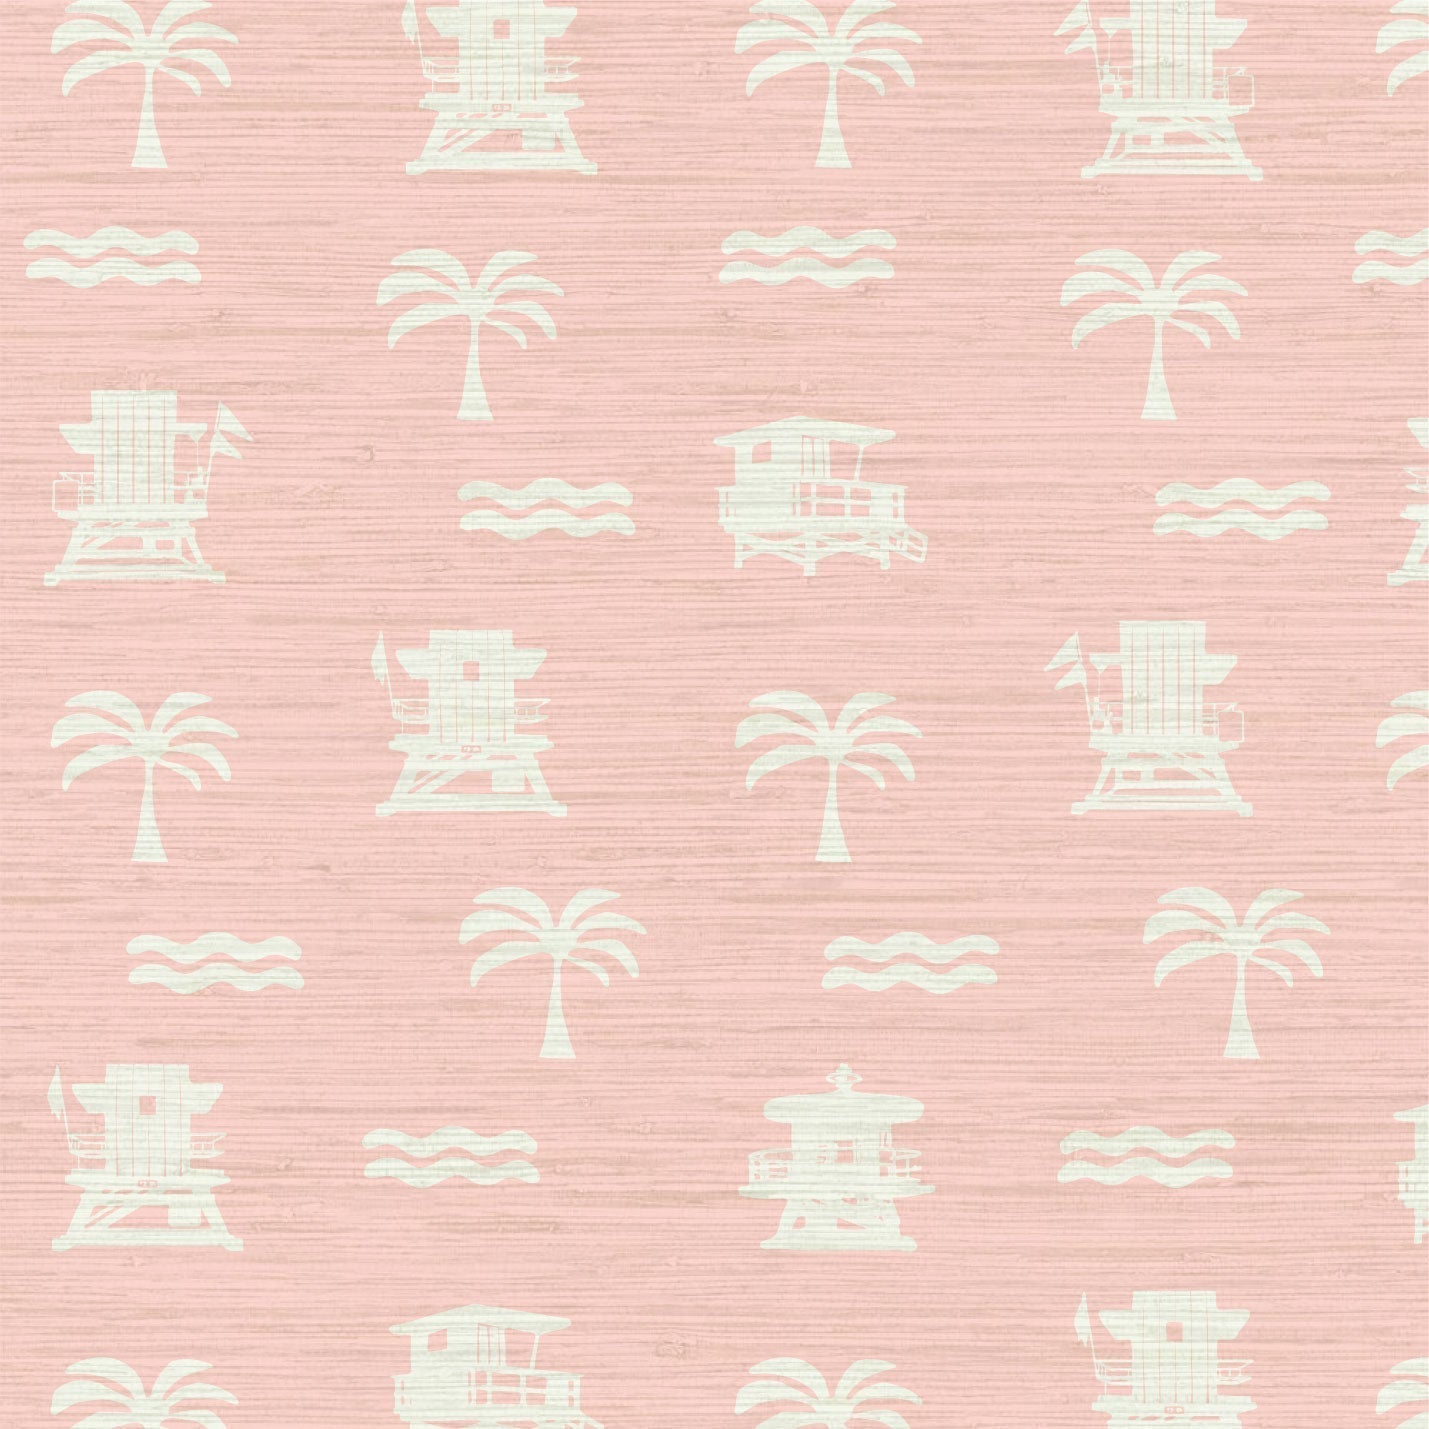 Grasscloth Natural Textured Eco-Friendly Non-toxic High-quality  Sustainable practices Sustainability Interior Design Wall covering wallpaper grid seaside coastal seashore waterfront vacation home styling retreat relaxed beach vibes beach cottage shoreline oceanfront nautical tropical ocean waves palm tree lifeguard stand mini print custom interior design light pink baby pink white